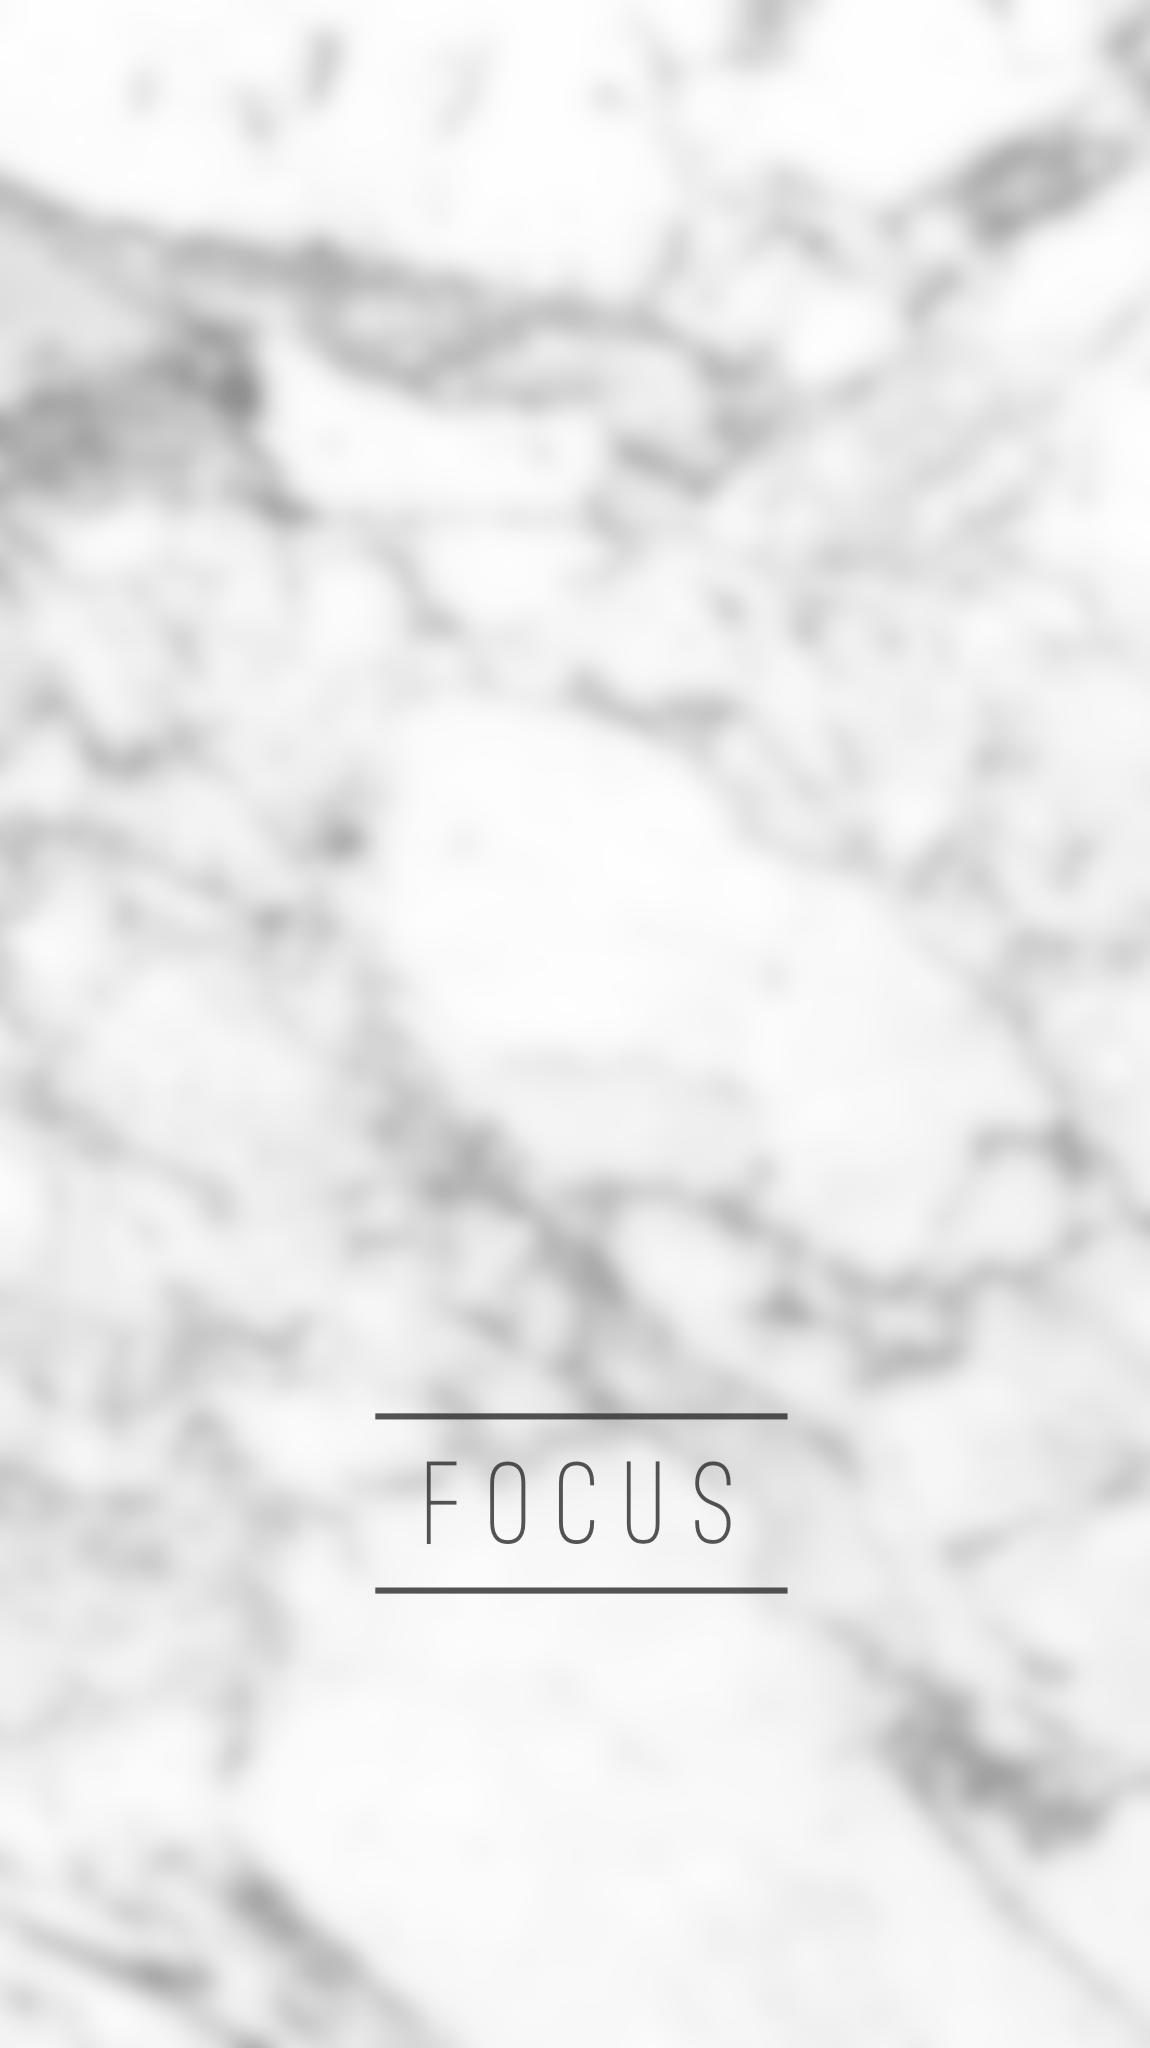 White Marble iPhone wallpaper. Marble wallpaper phone, Phone inspiration, Marble iphone wallpaper